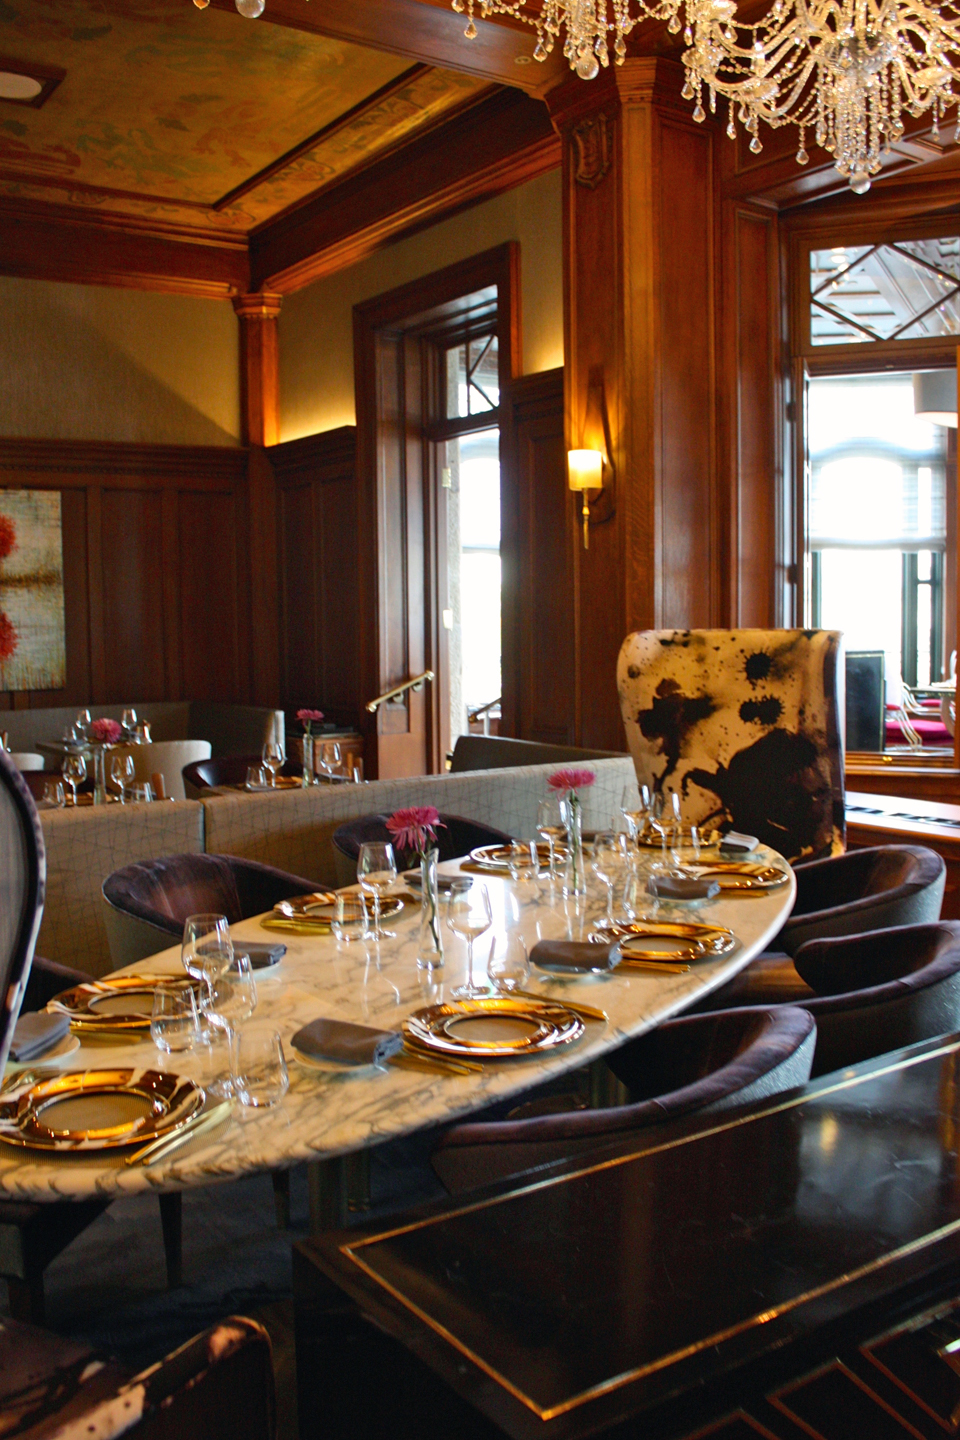 Champlain dining room, Chateau Frontenac, Quebec City